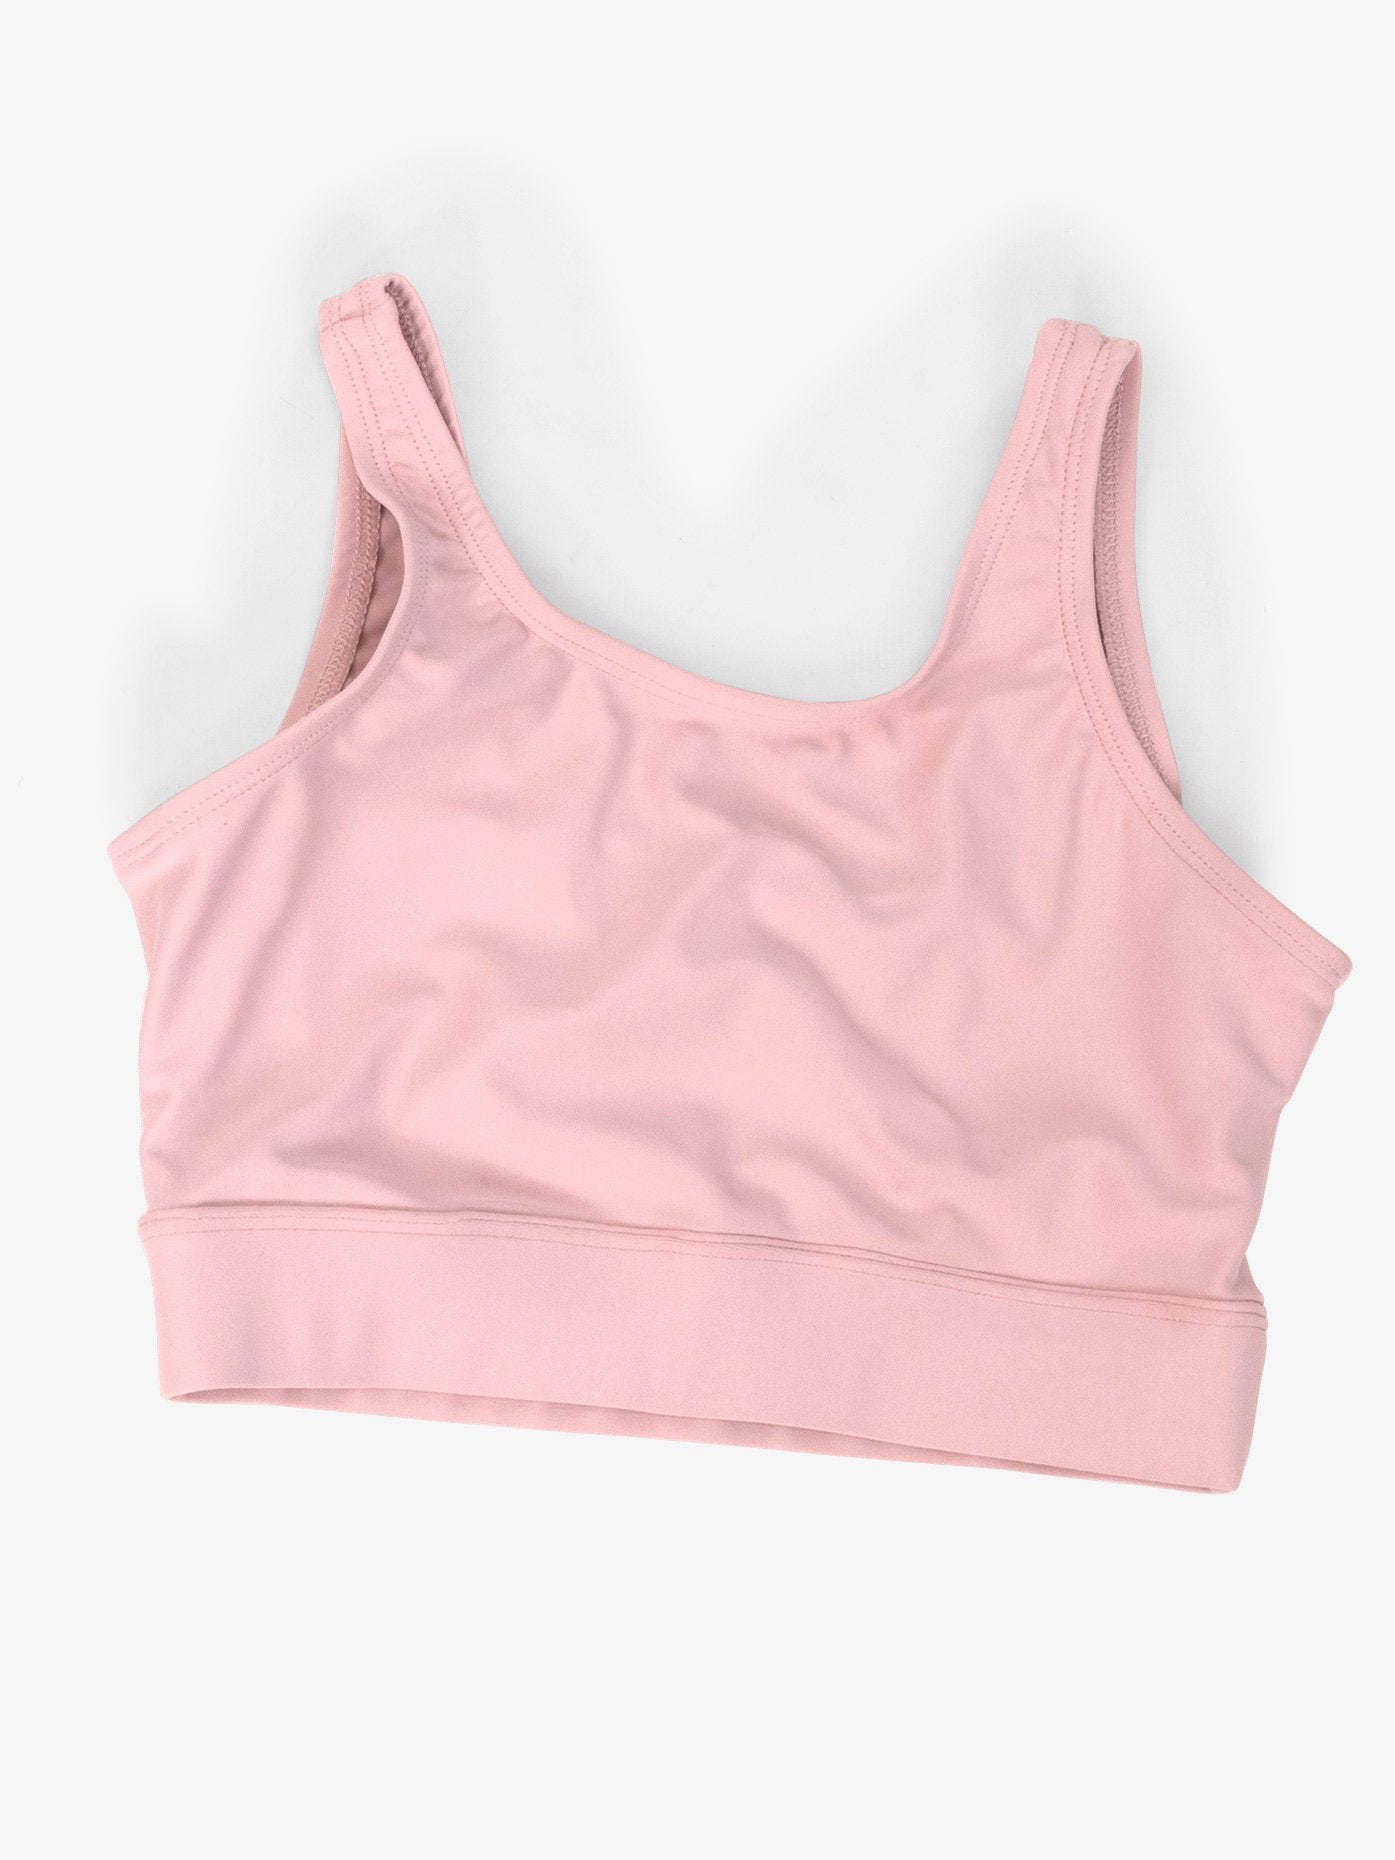 Girl's pinched back light pink bra top